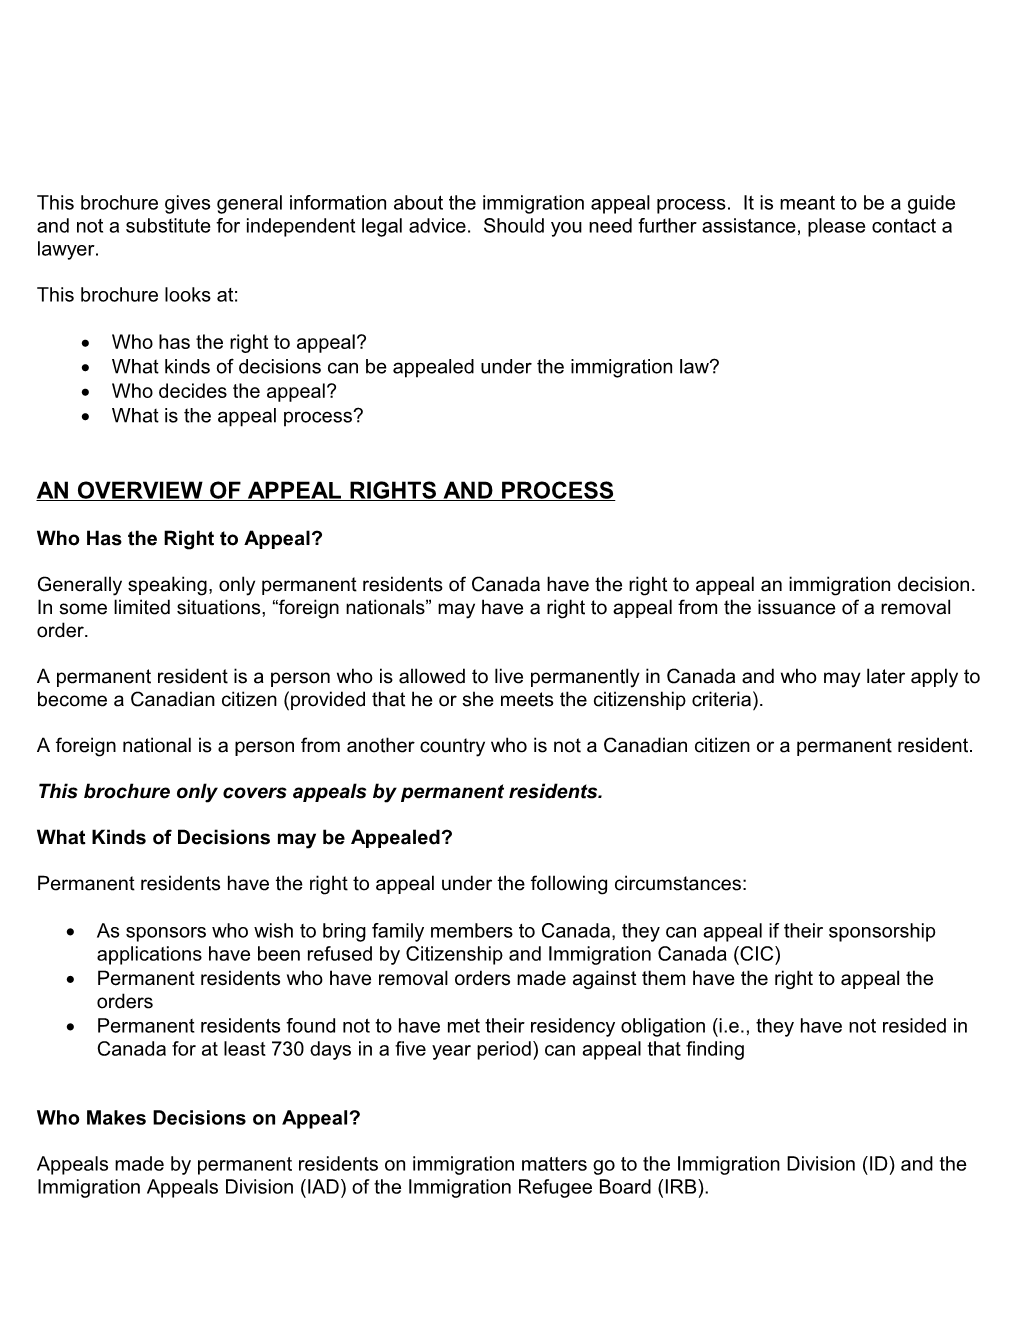 This Brochure Gives General Information About the Immigration Appeal Process. It Is Meant